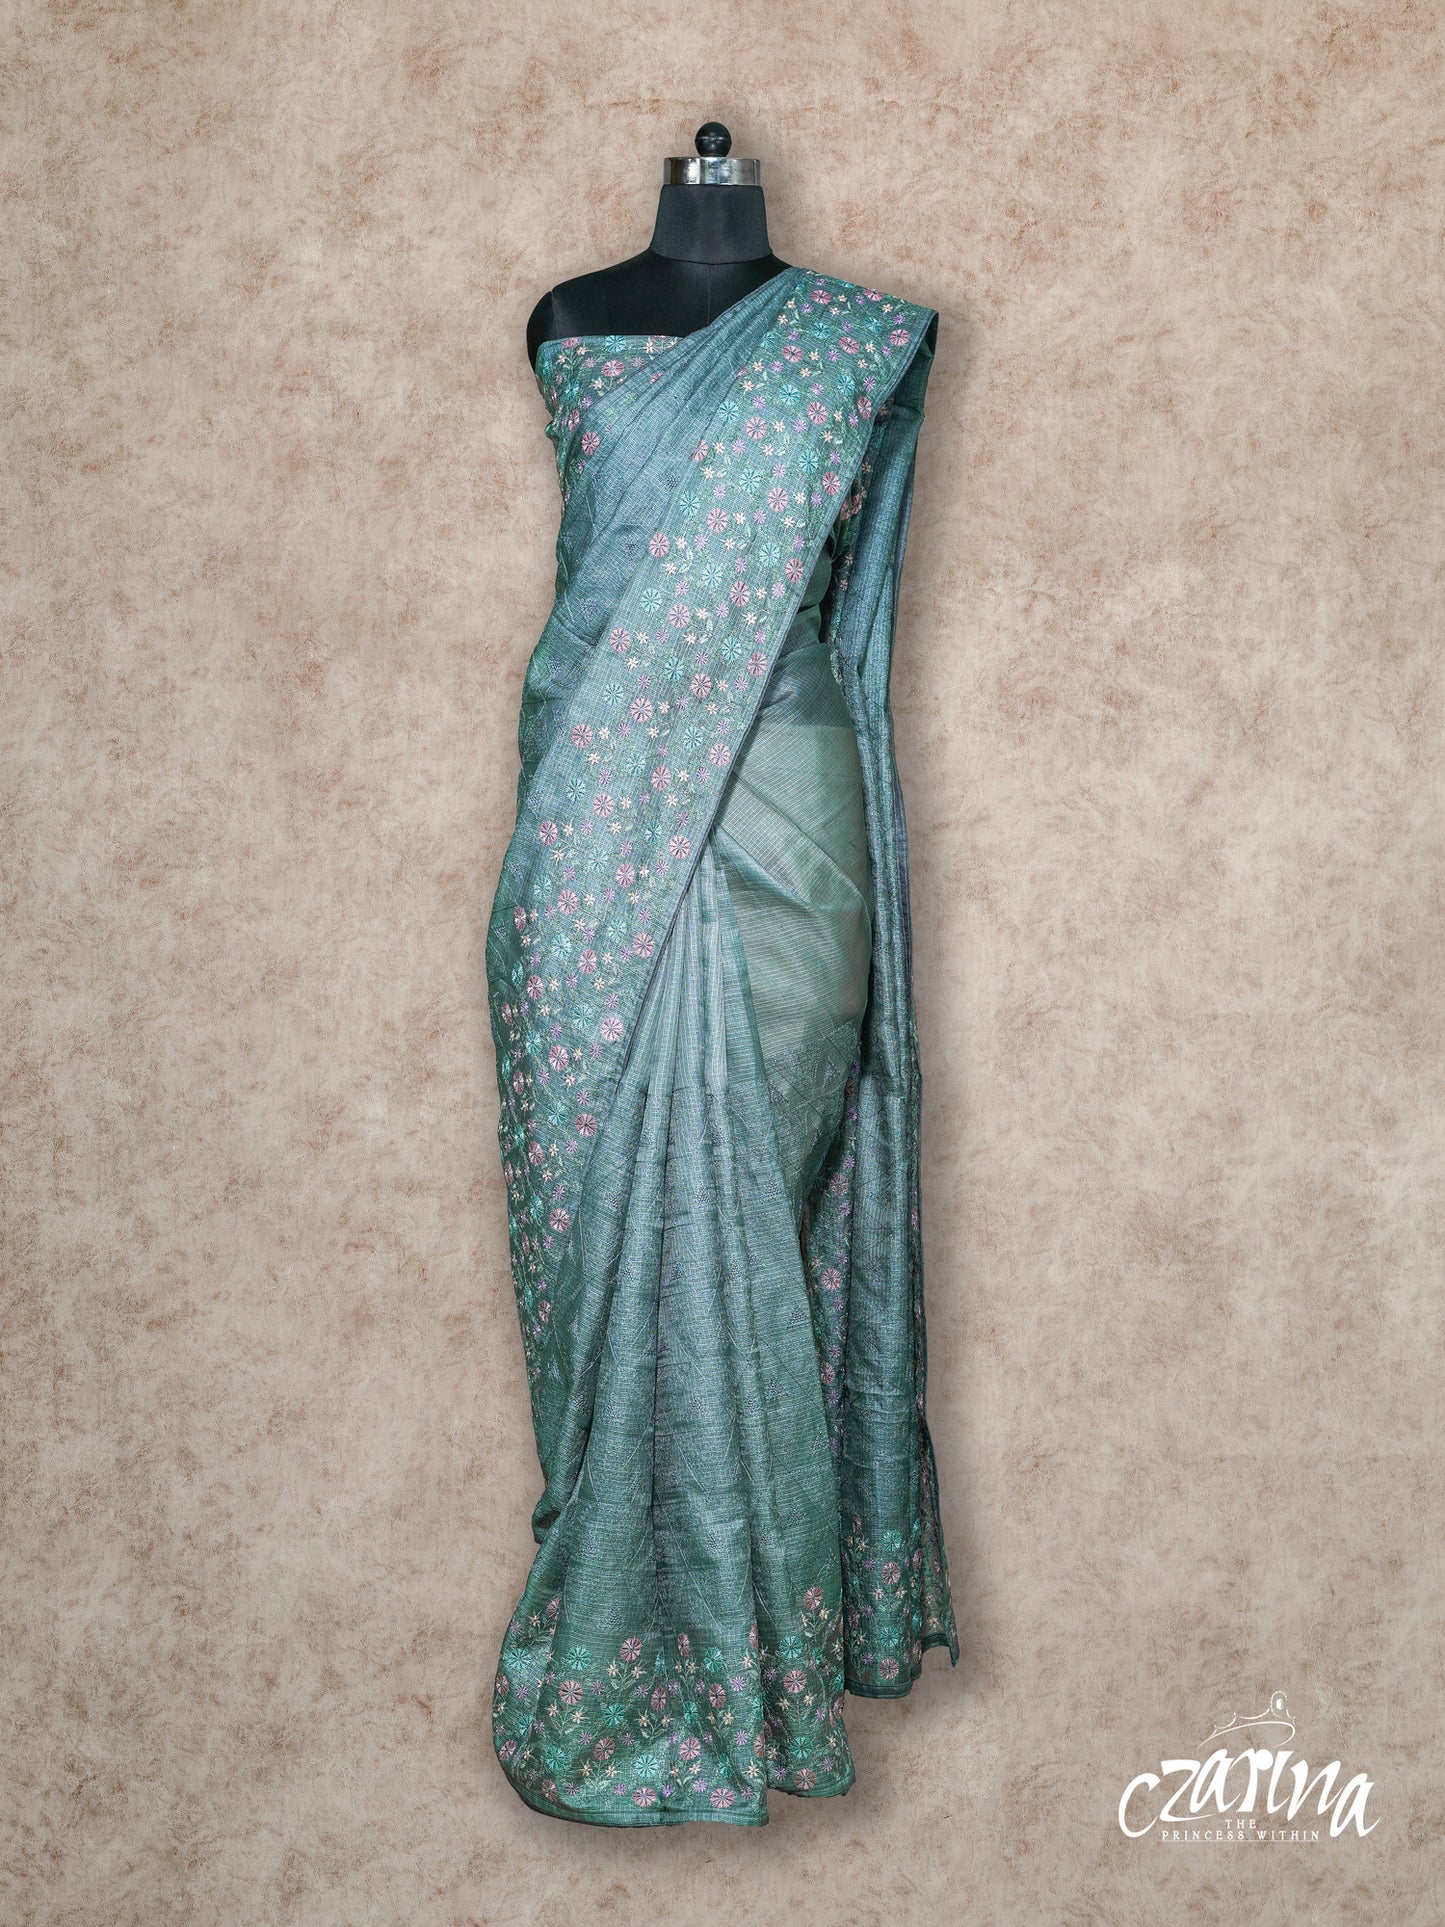 SILVER GREY WITH FINE THREAD EMBROIDERY IN SHADES OF PINK AND GREY SILK KOTA SAREE